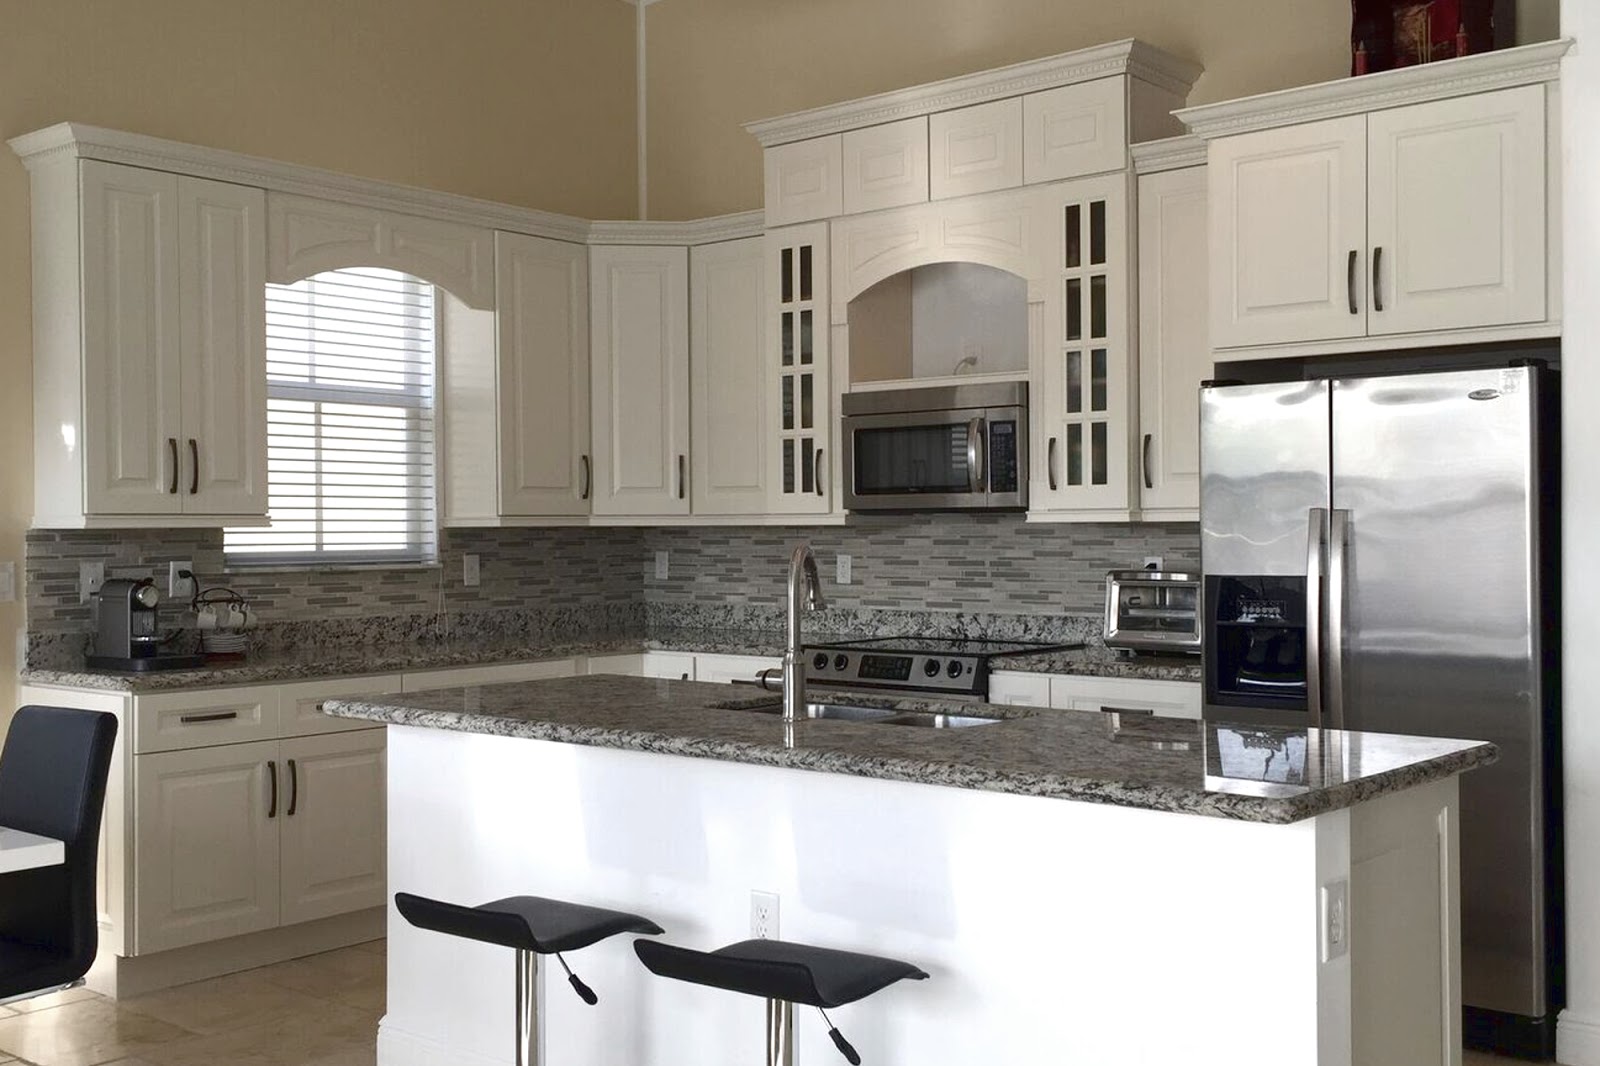 Jarlin Cabinetry - Beautiful Cabinets at Great Prices: A Great Line of